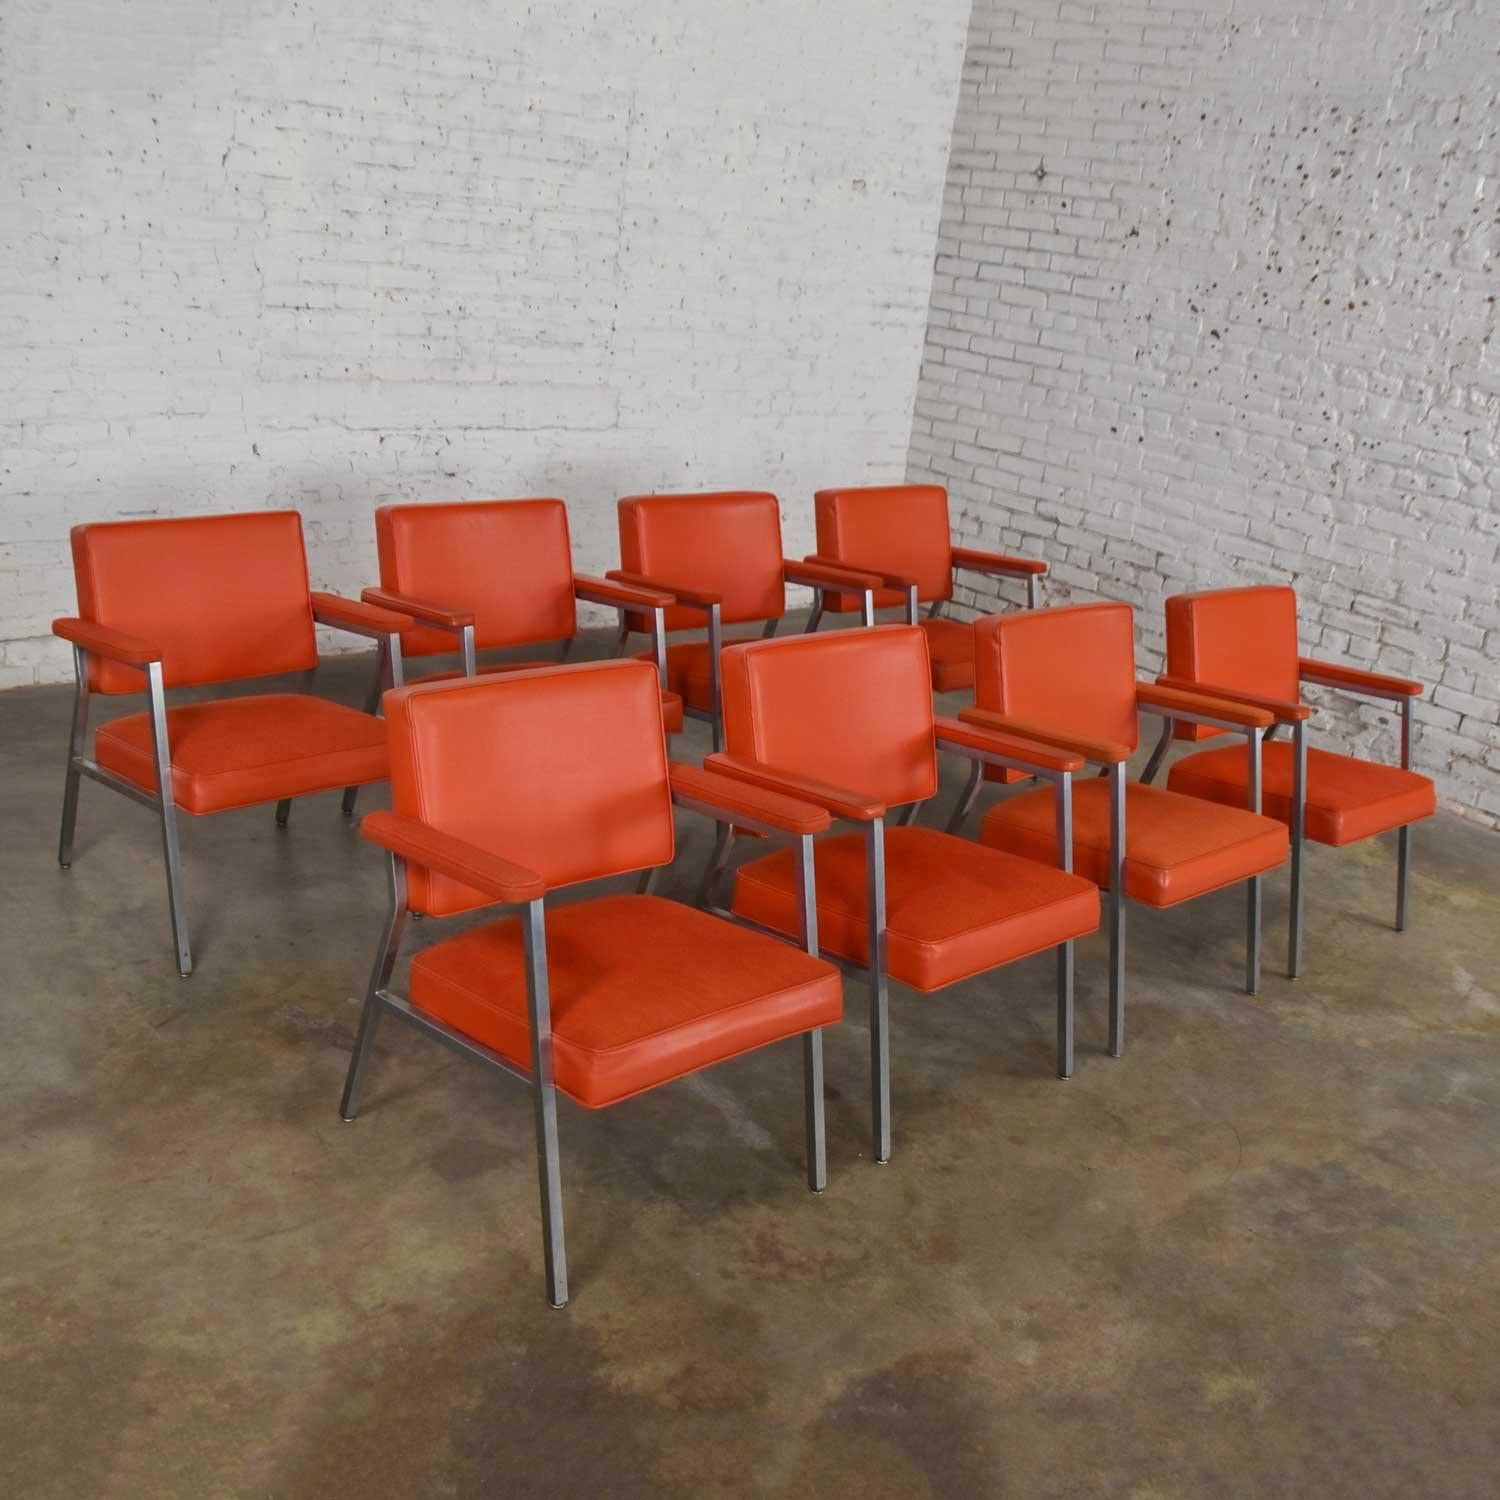 Outstanding Mid-Century Modern Steelcase coral dining armchairs set of eight. Comprised of polished steel, vinyl, and fabric in wonderful vintage condition. The foam in one seat cushion has Gotten a bit dry and will probably need replaced